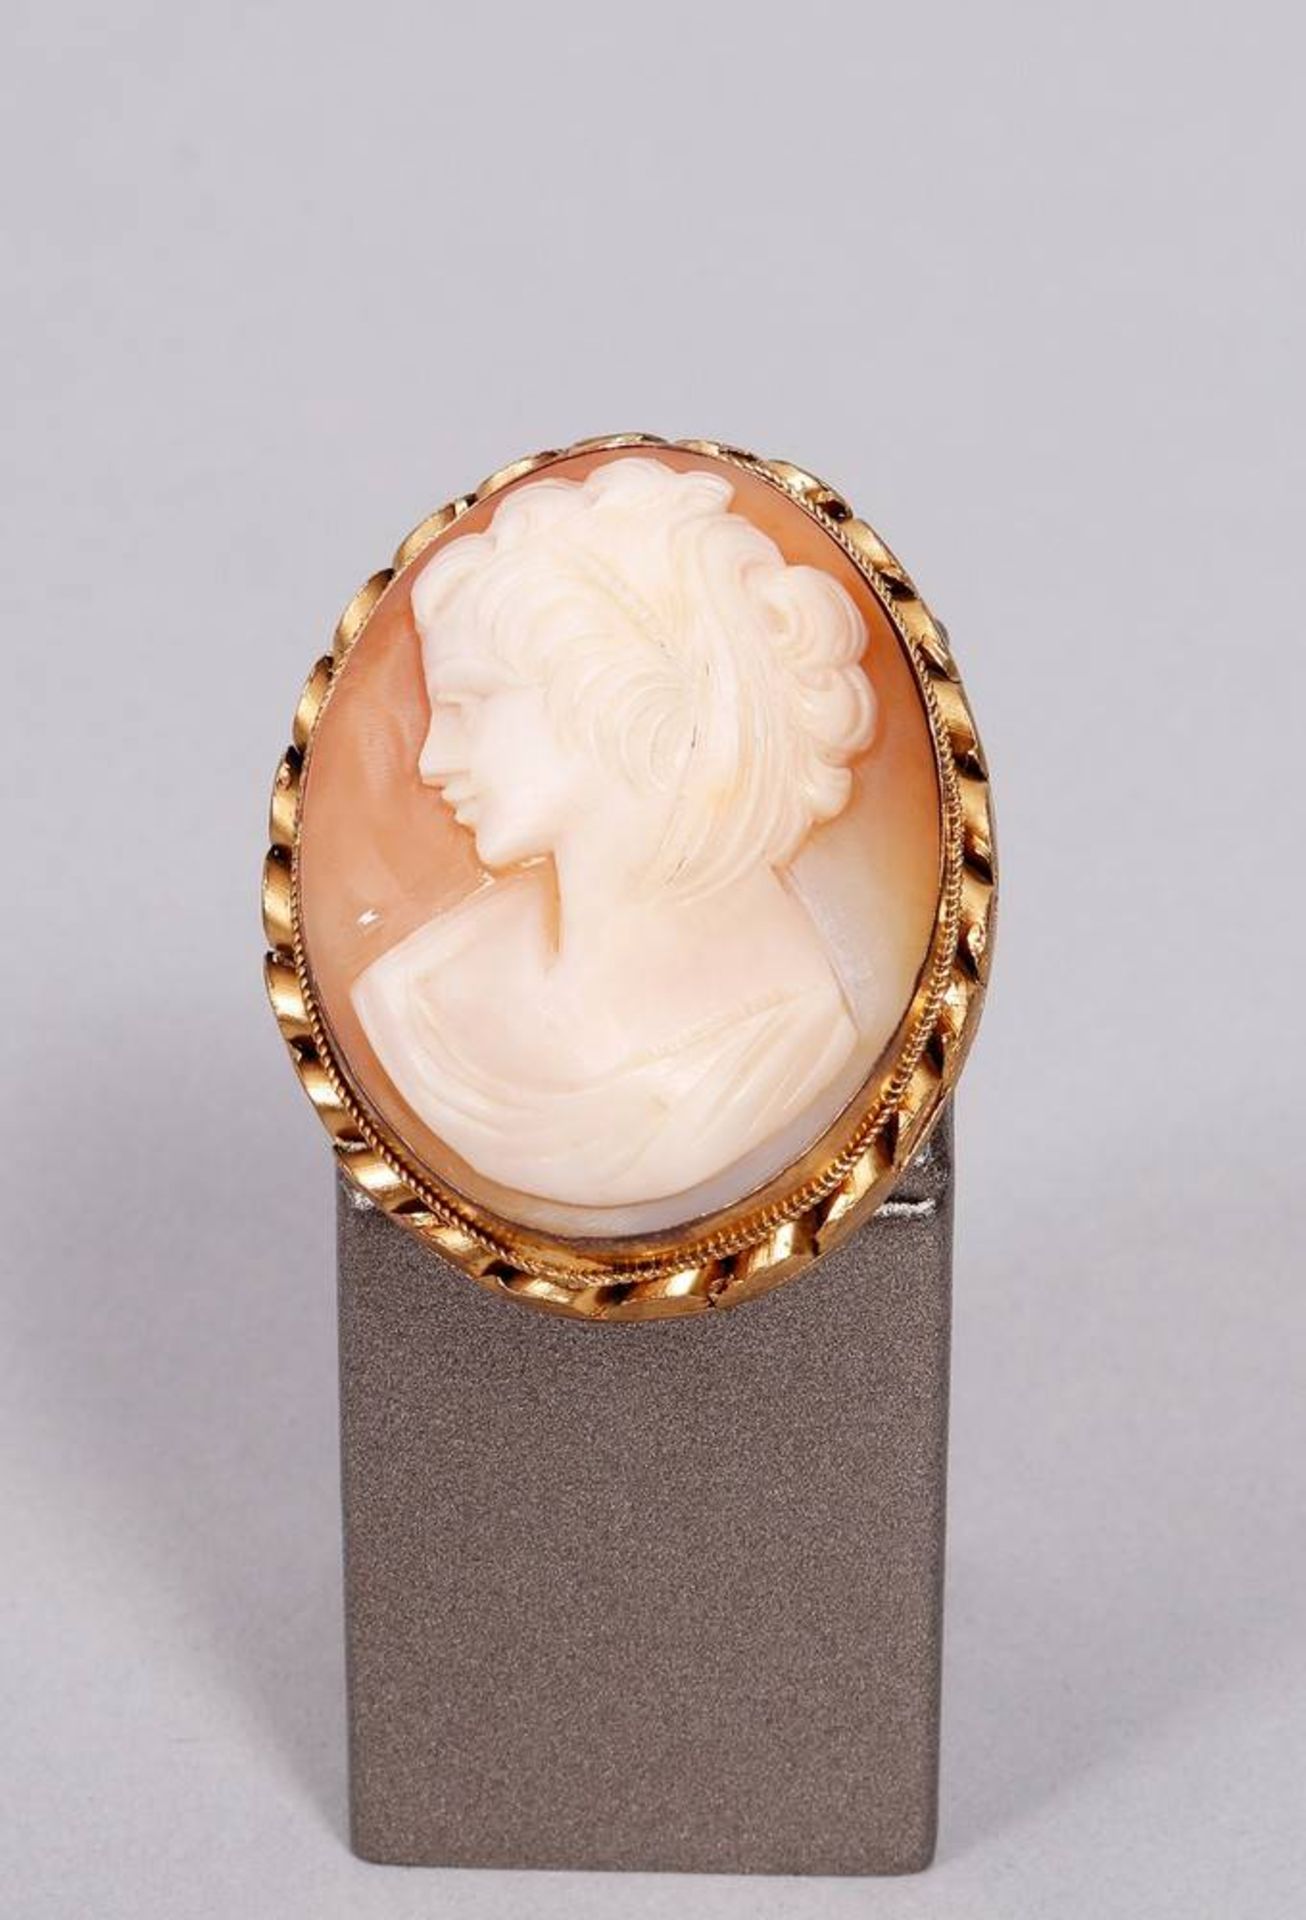 Camee brooch, portrait of a woman, ca. 1880